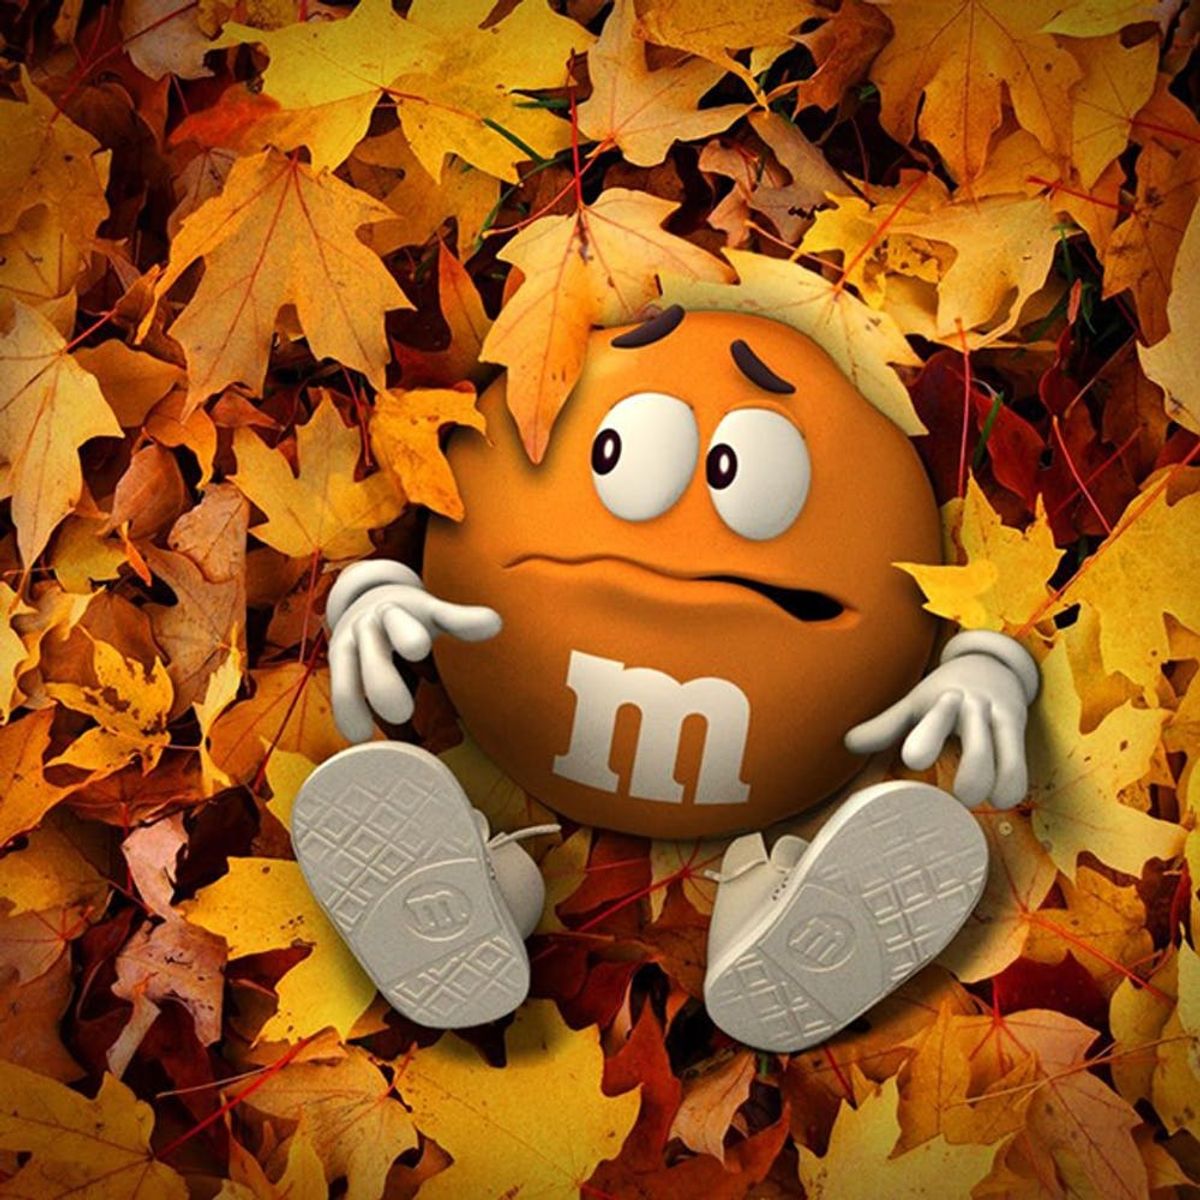 PSL Lovers, This New M&M’s Flavor Is for You